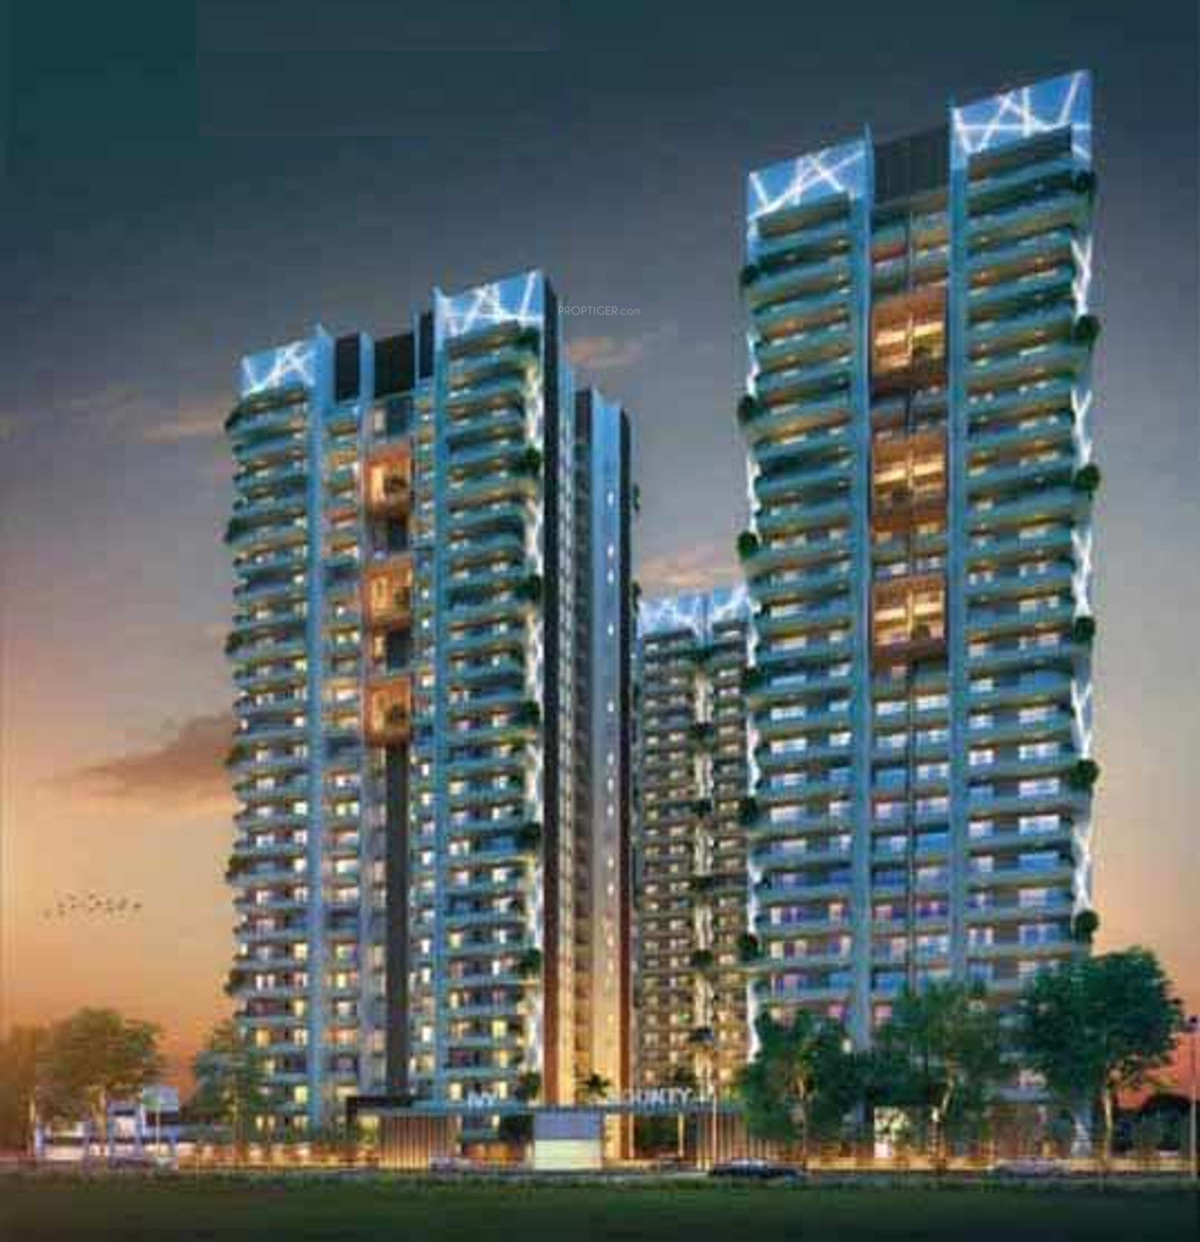 3 BHK flat area 1656 sq ft for sale in IVY County Noida 